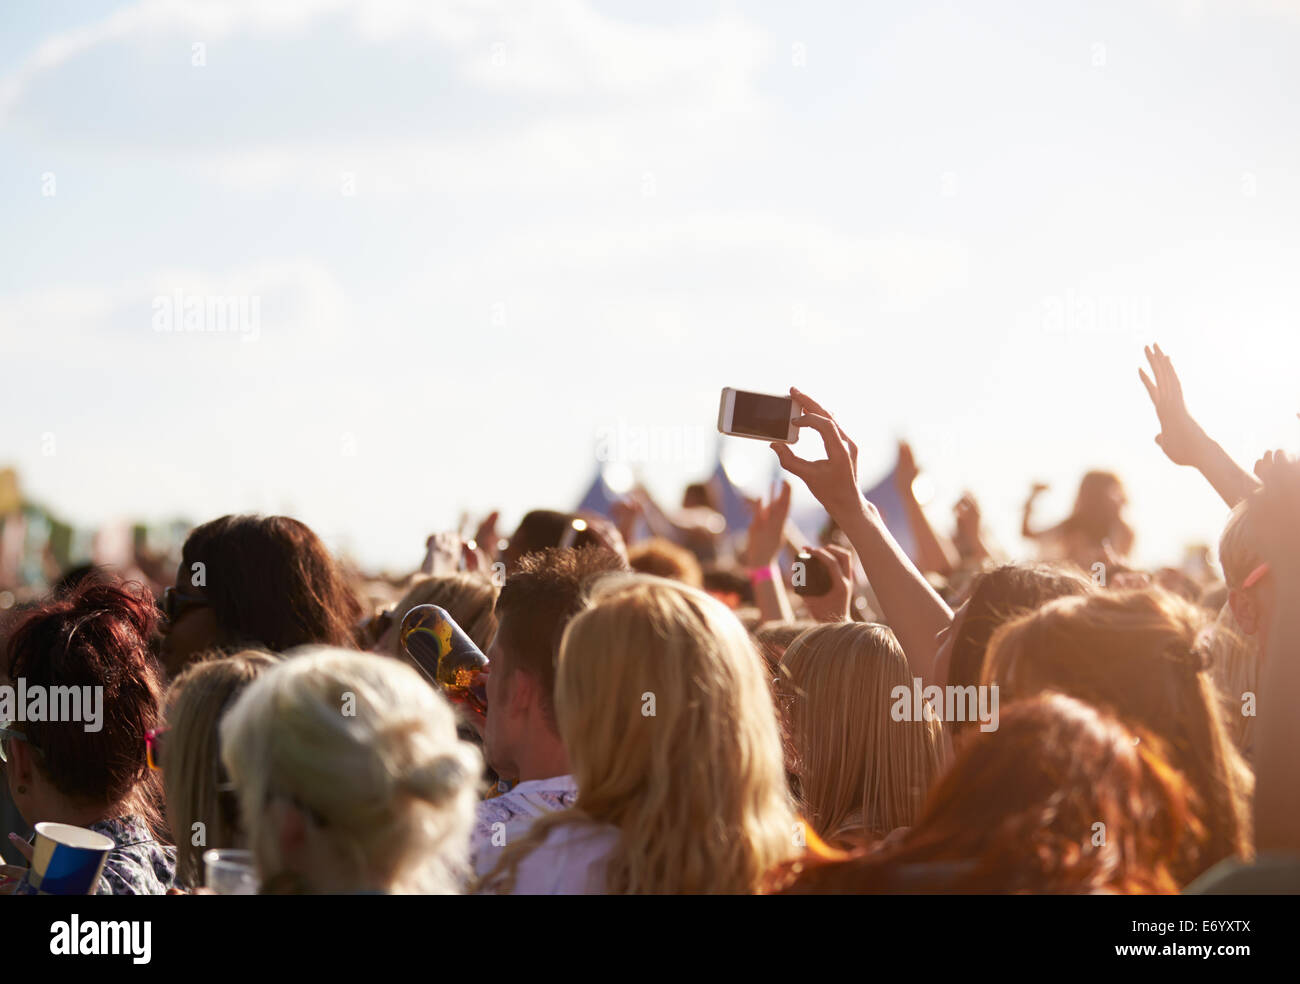 Audience At Outdoor Music Festival Stock Photo